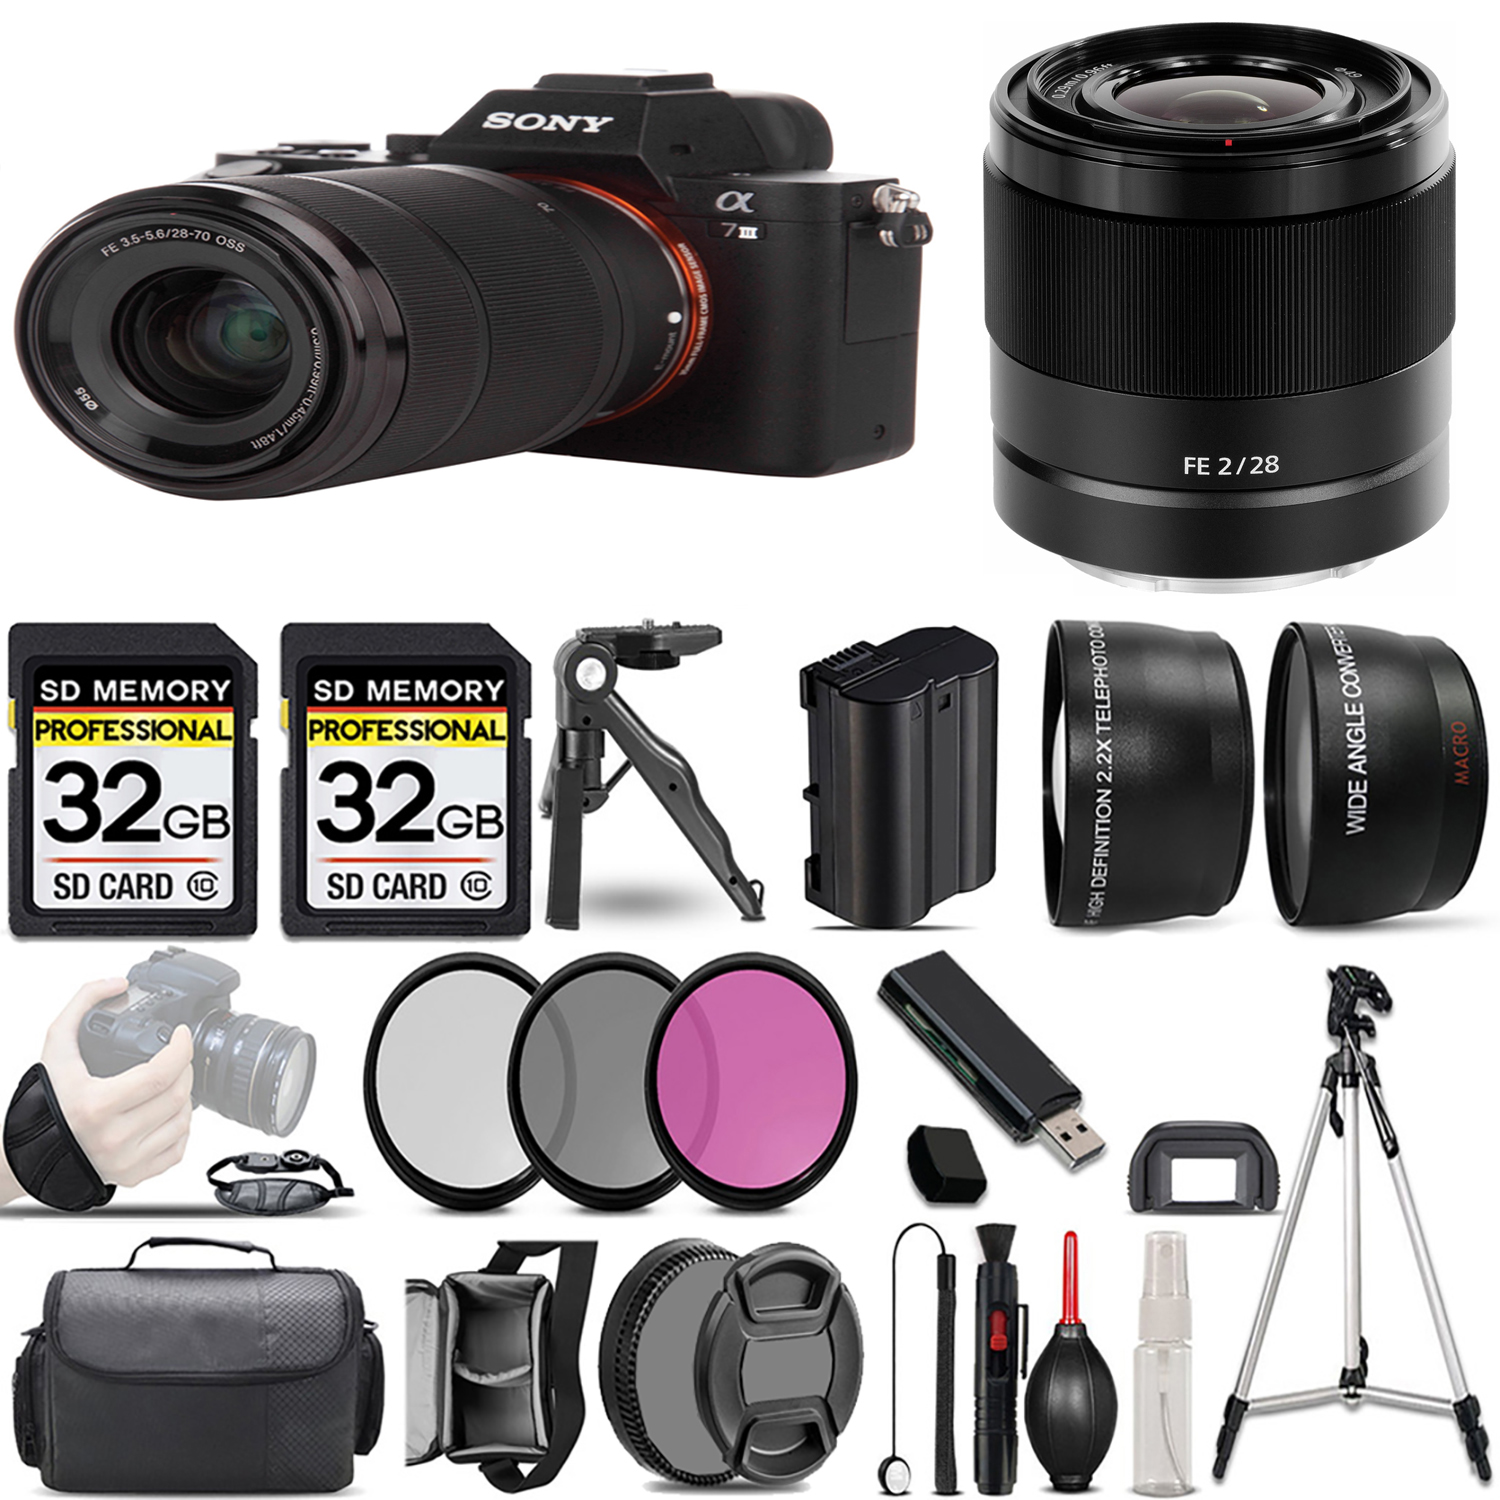 a7 III  Camera + 28-70mm Lens + 28mm f/2 Lens + 3 Piece Filter Set + 64GB + Bag & More! *FREE SHIPPING*